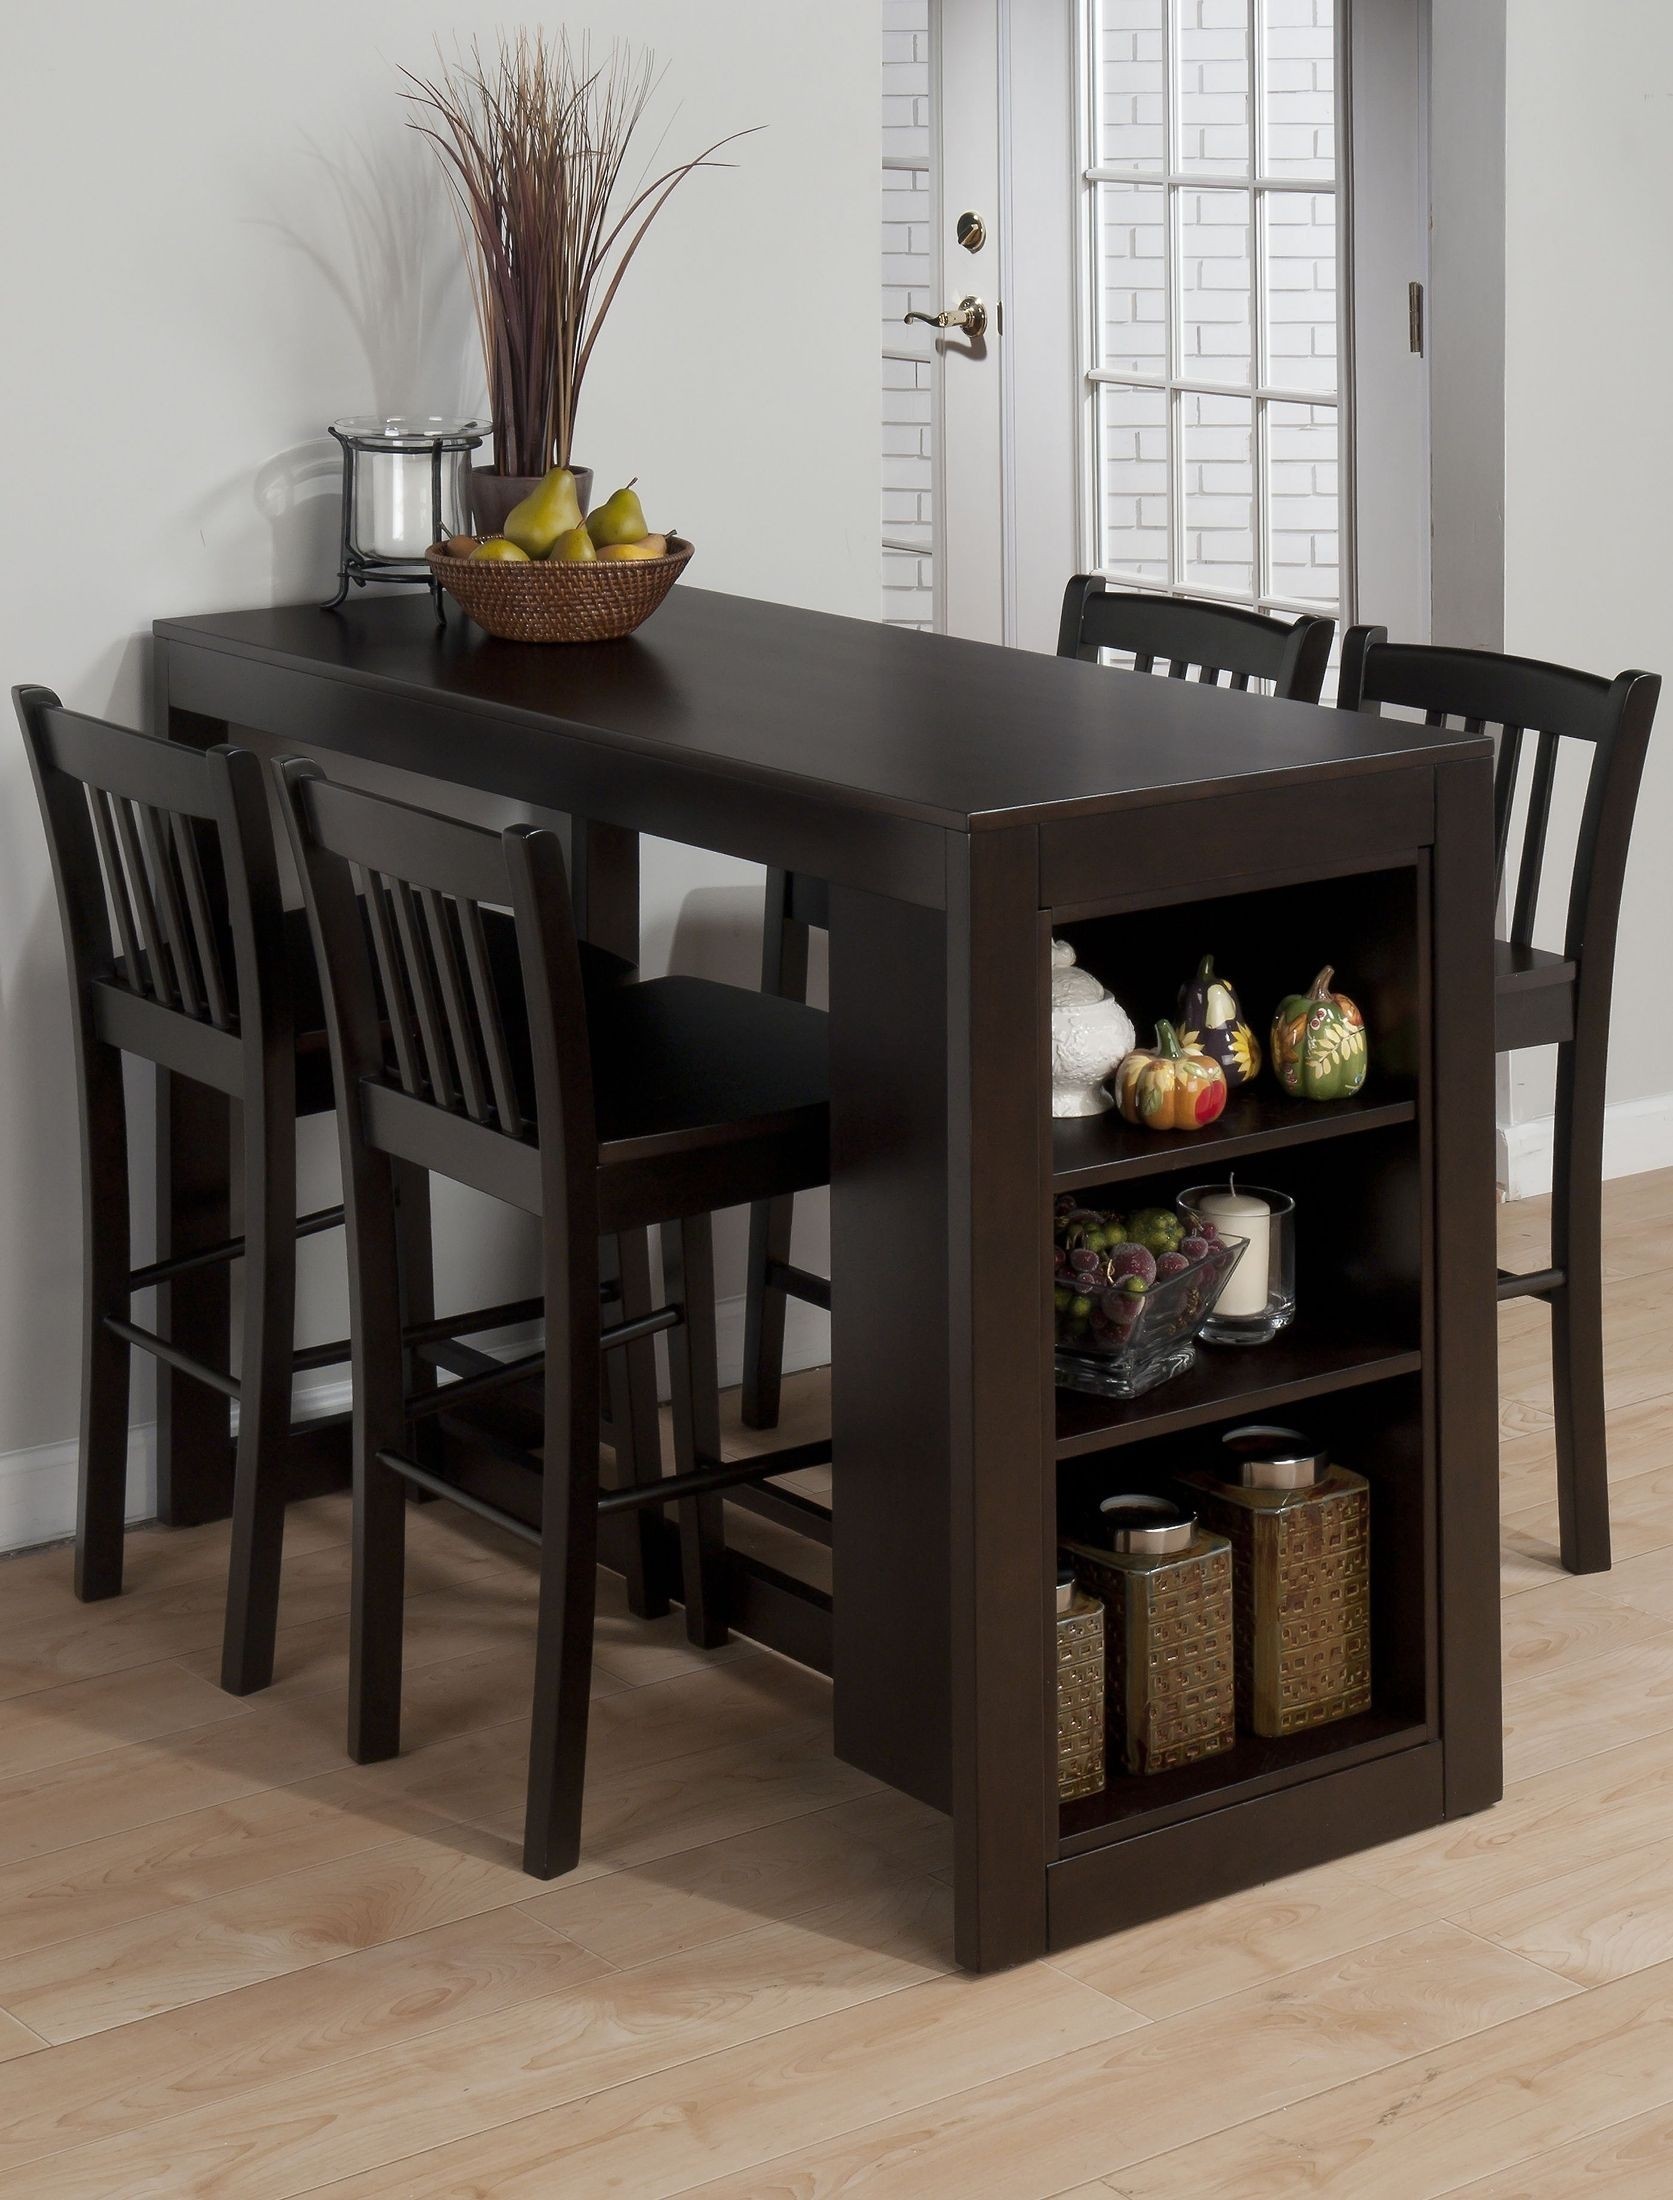 Home Kitchen Breakfast Bar Stand Furniture 1m Tall Black Wooden Dining Table 